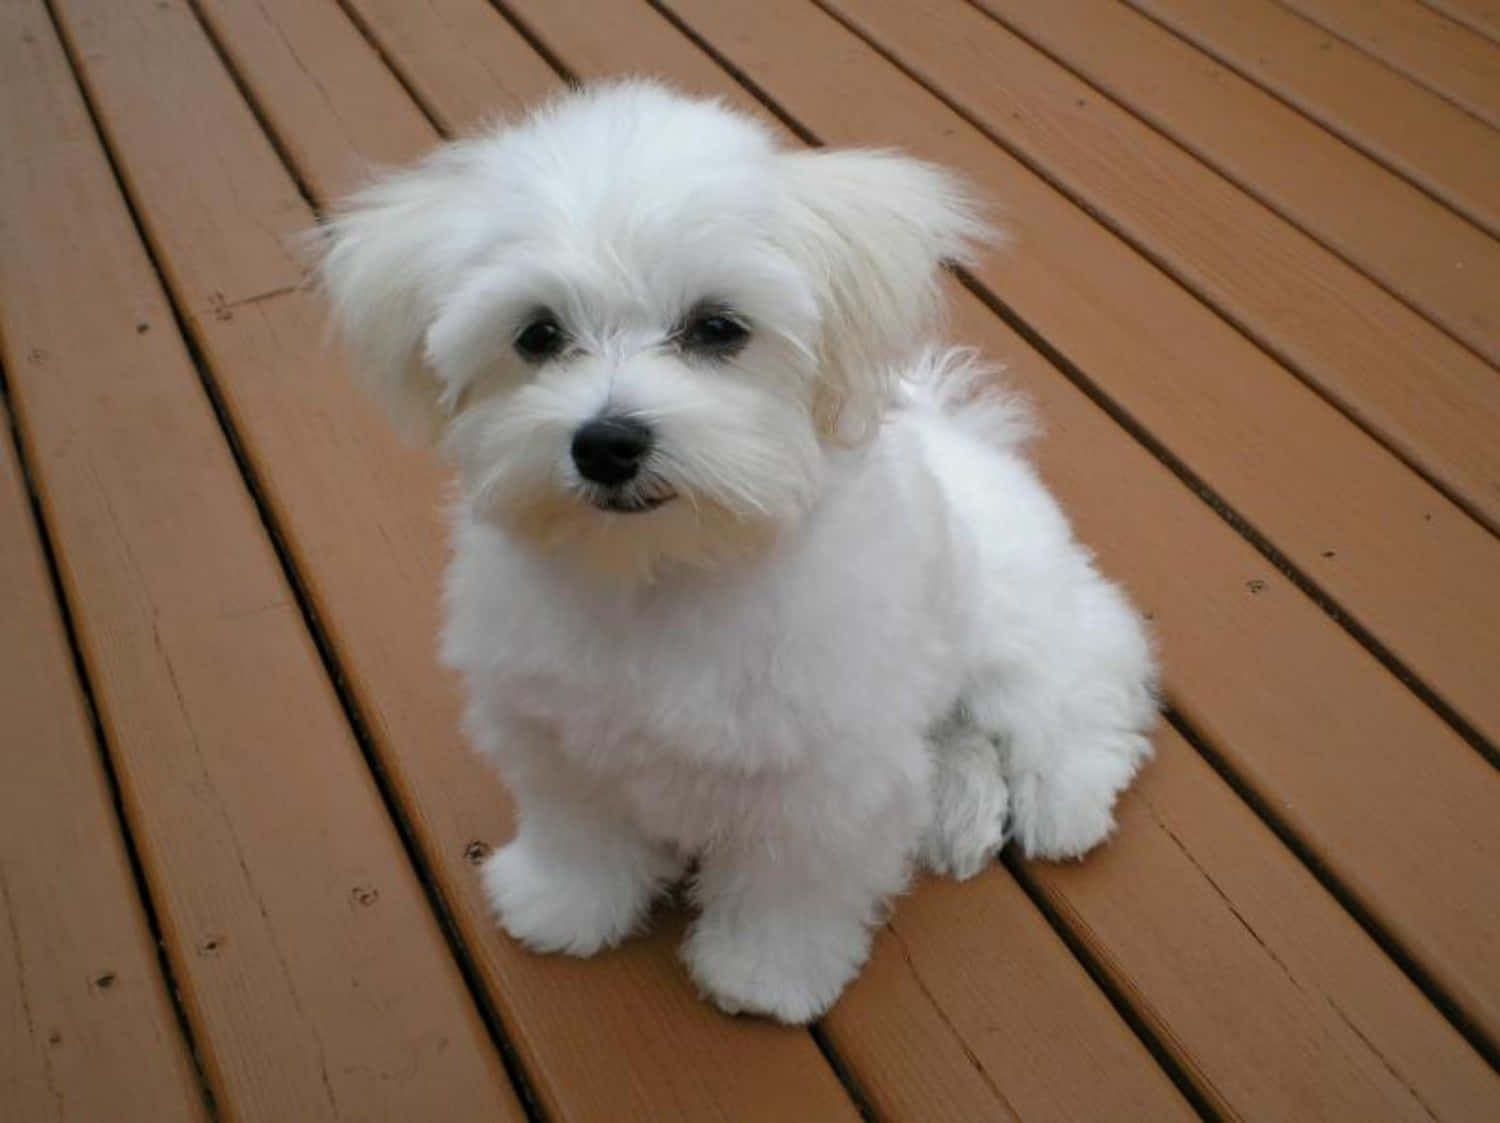 A White Dog Sitting On A Wooden Deck